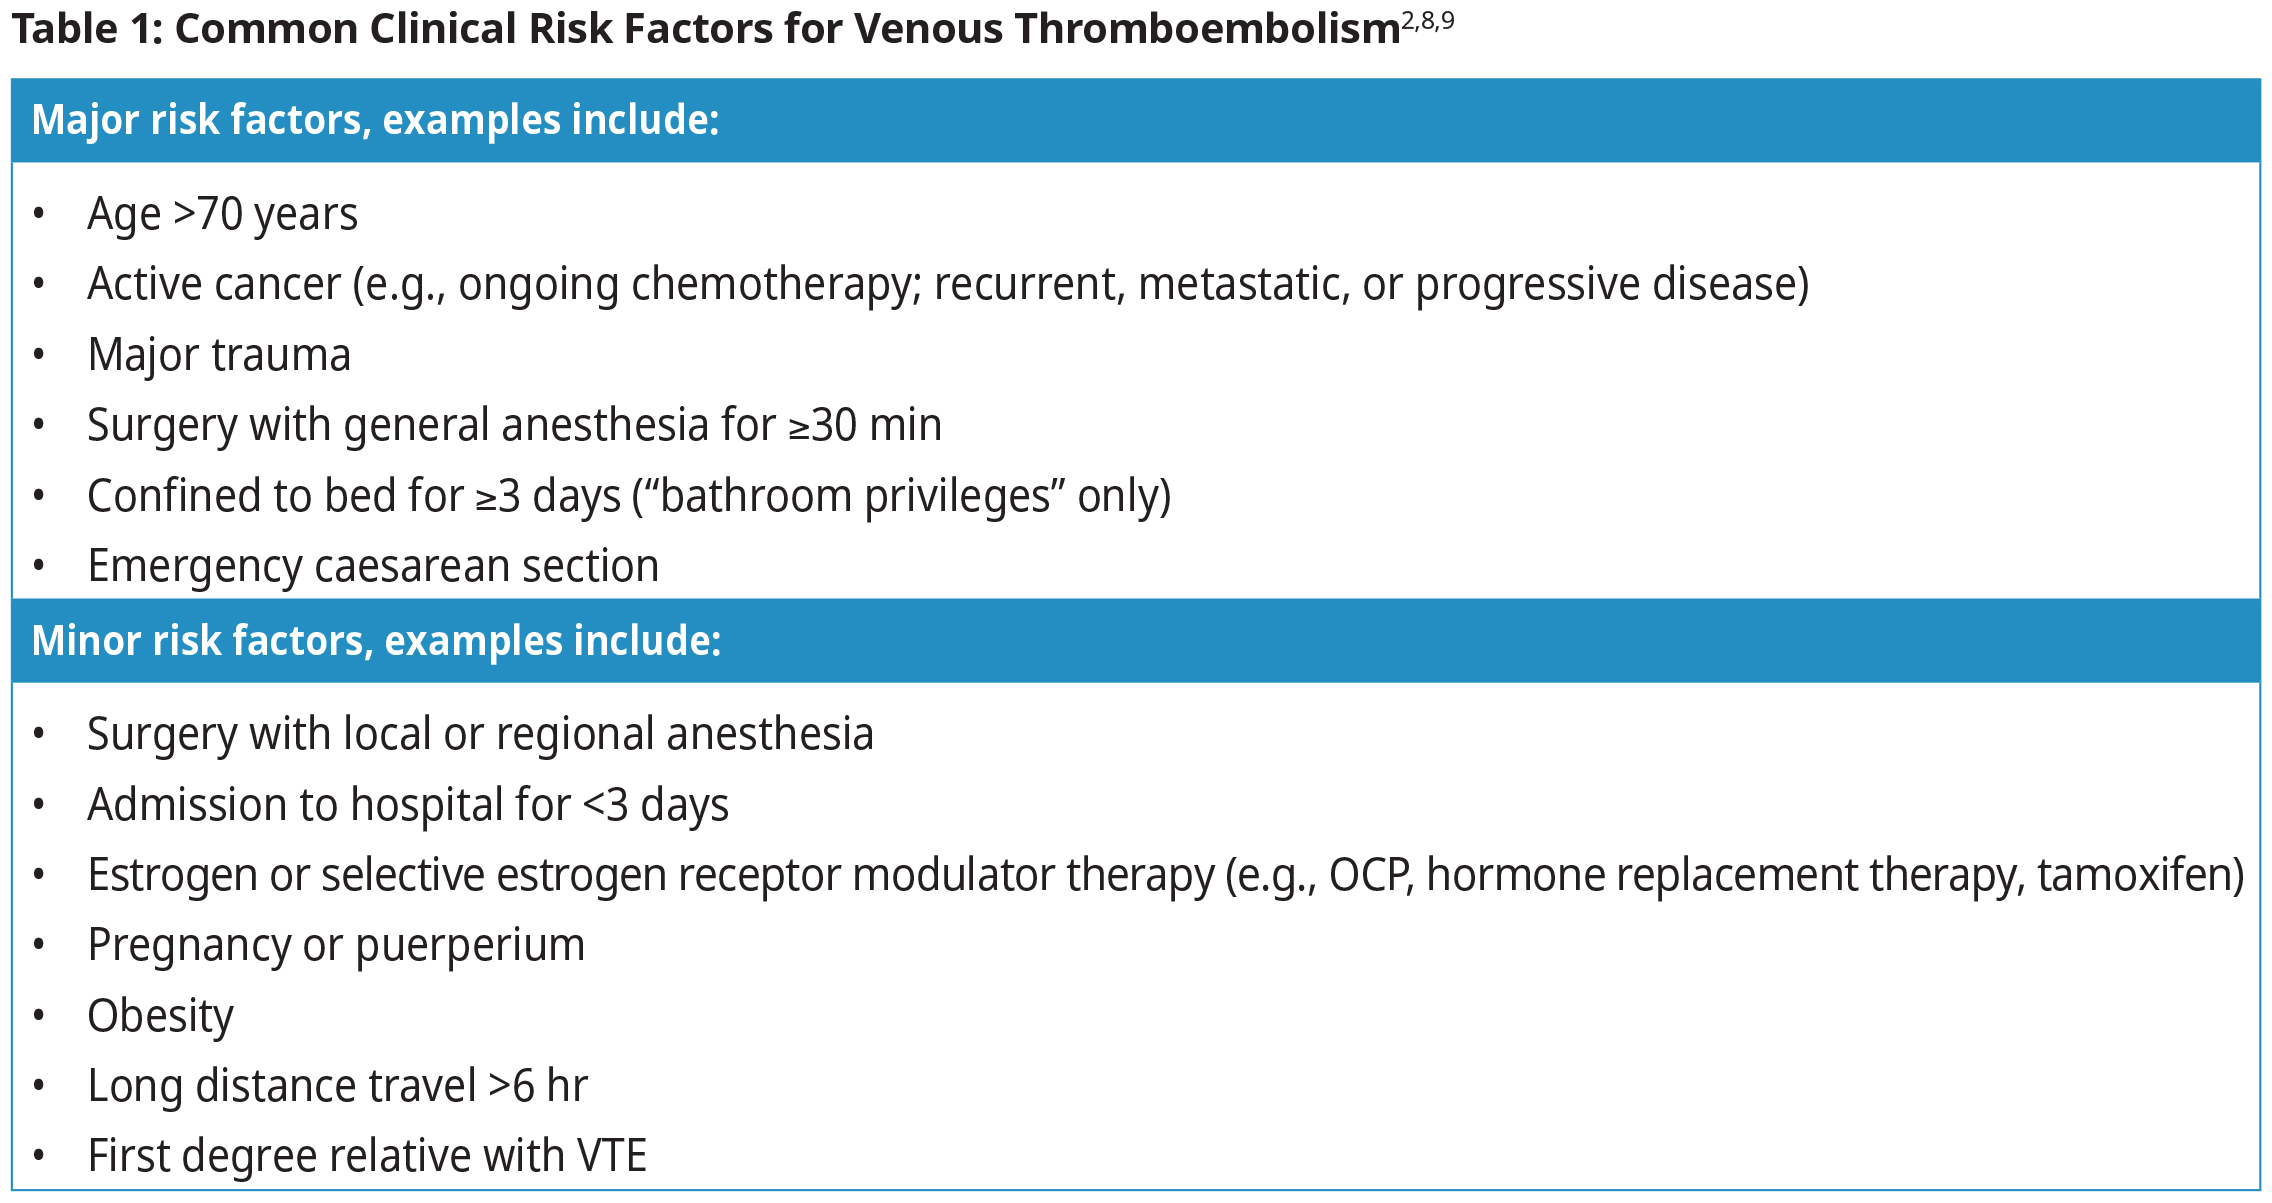 Common Clinical Risk Factors for Venous Thromboembolism Table